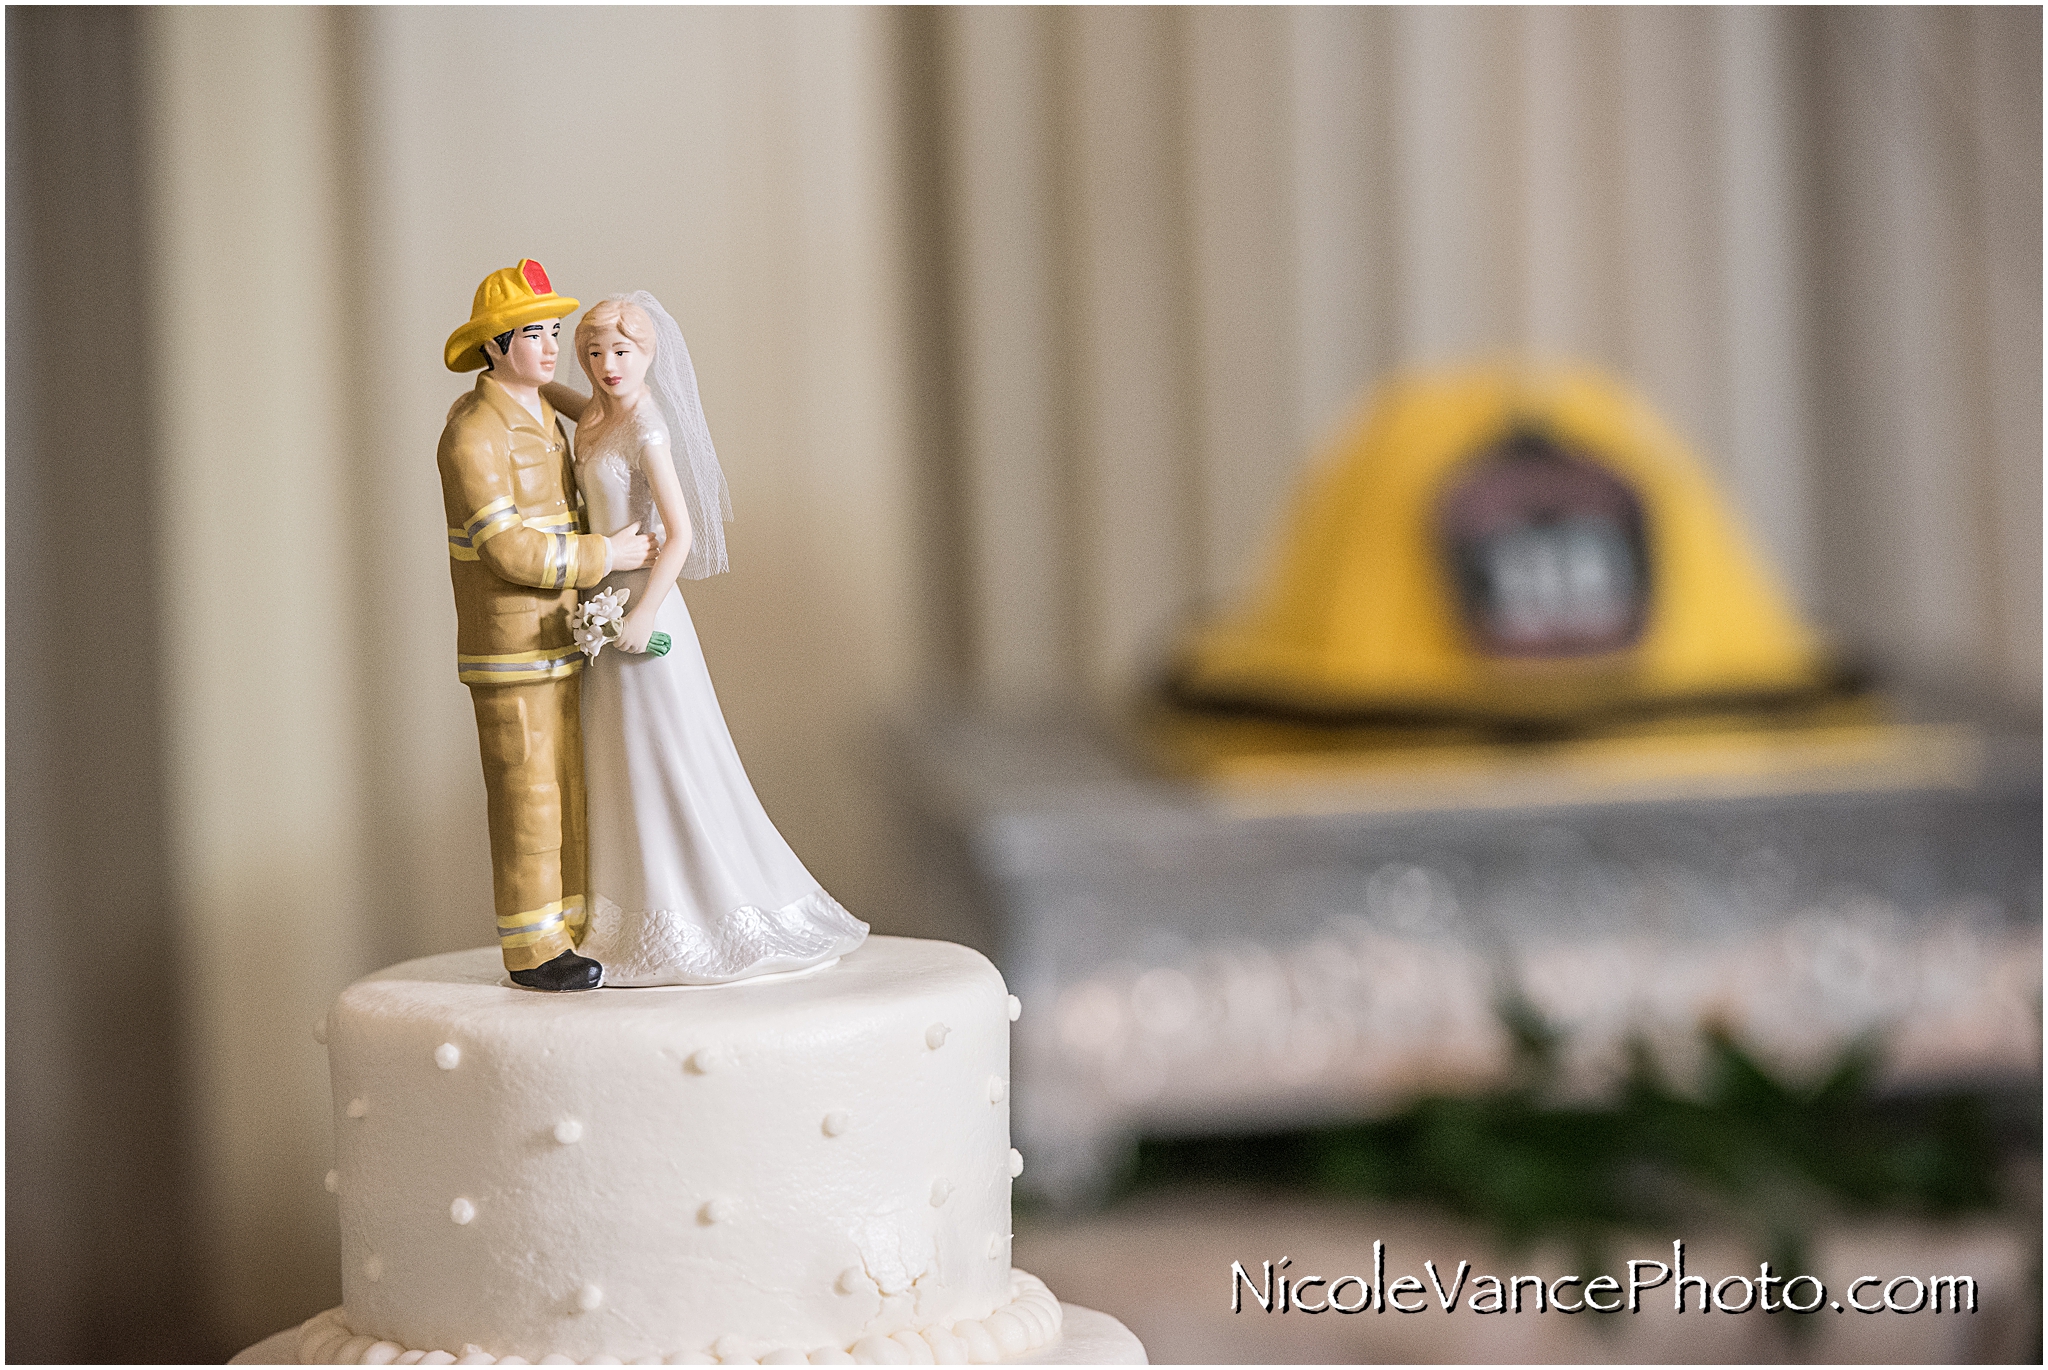 This classic wedding cake is topped with a very special cake topper featuring a firefighter. 